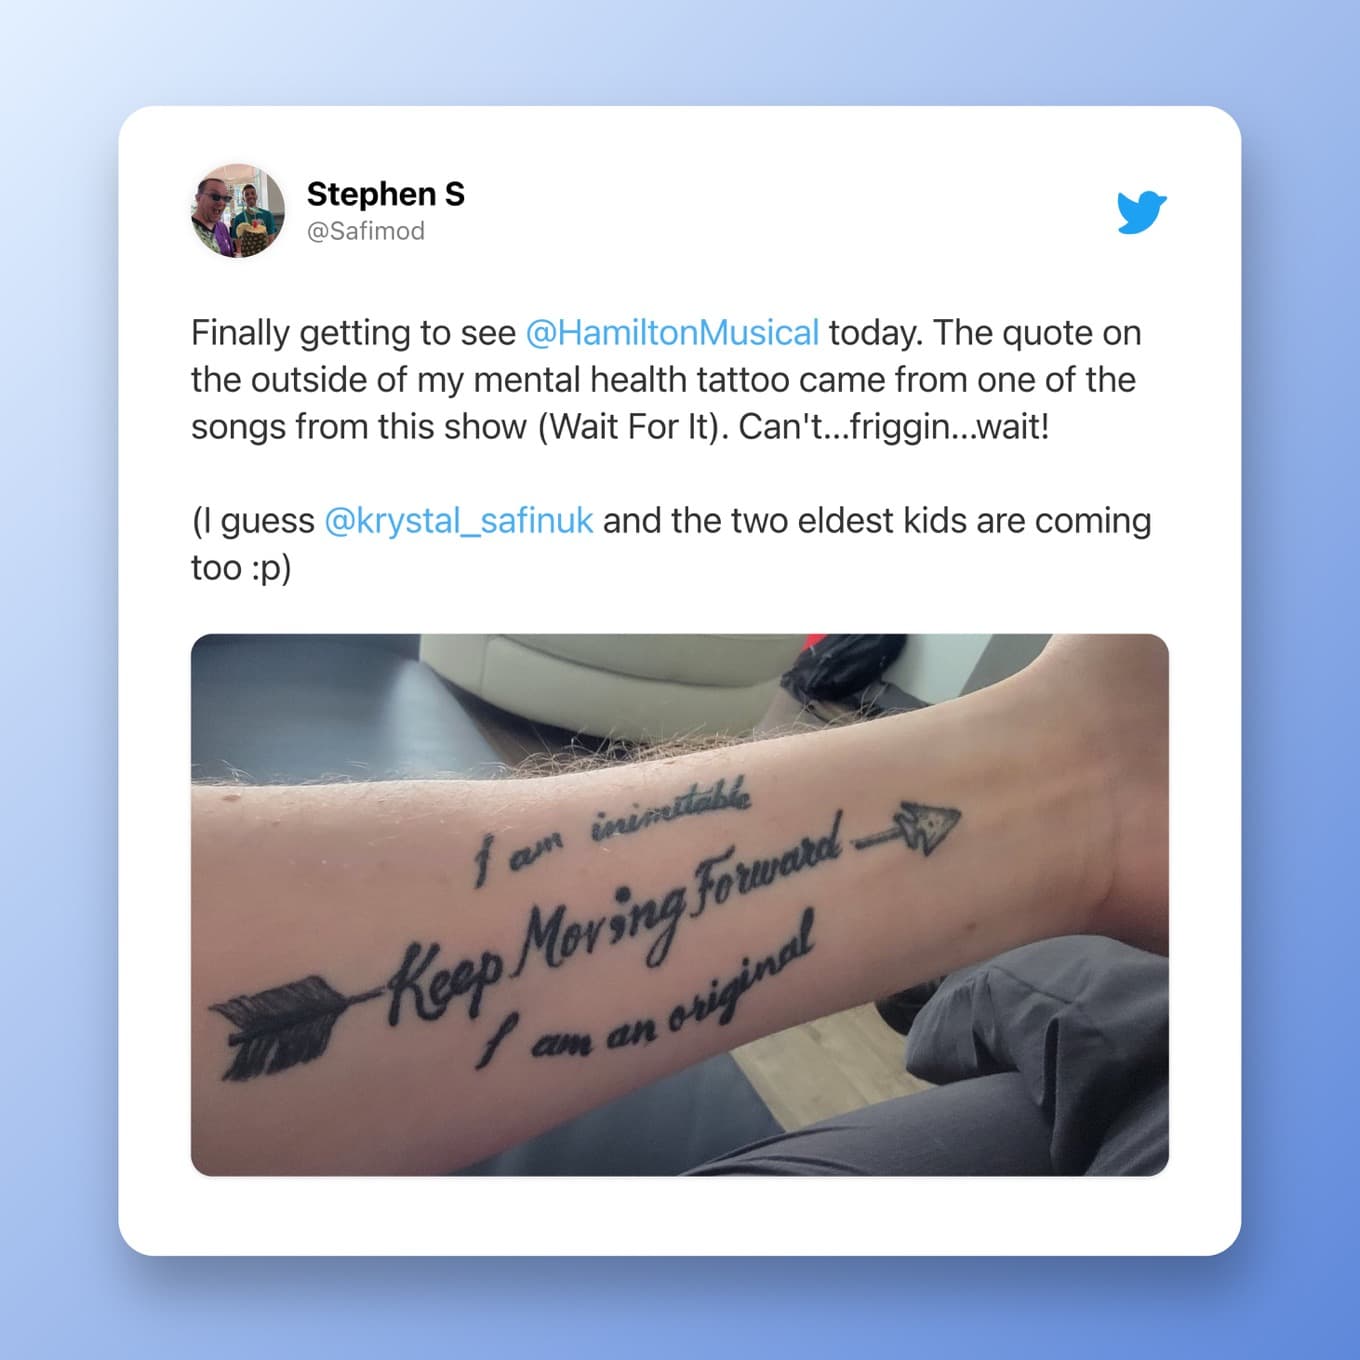 Finally getting to see  @HamiltonMusical  today. The quote on the outside of my mental health tattoo came from one of the songs from this show (Wait For It). Can't...friggin...wait!